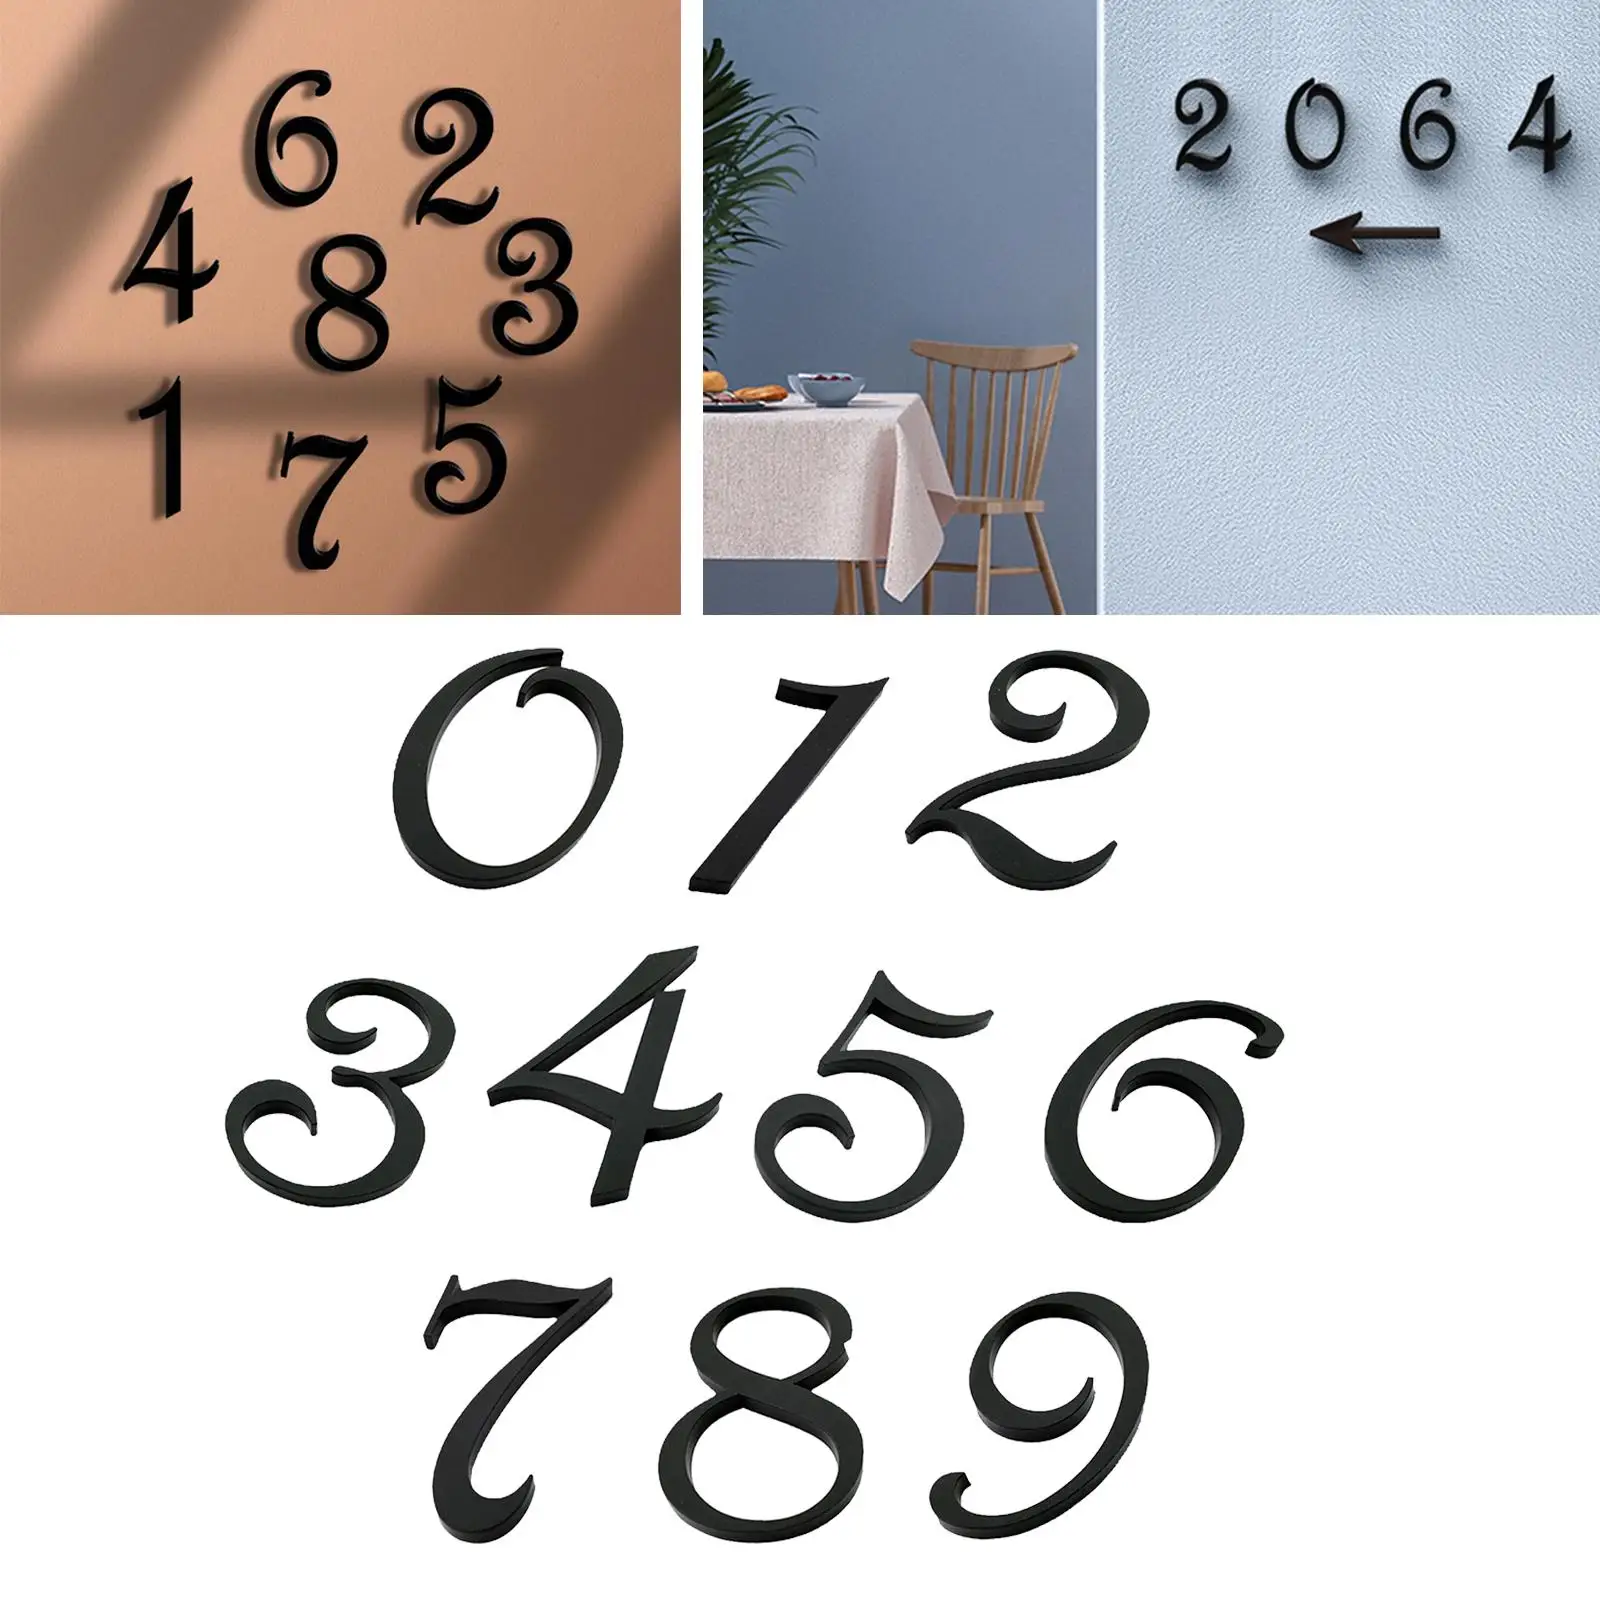 3D Numbers Flat Number Plates Self Adhesive Street Address Stickers for Room Door Office Apartment Hotel